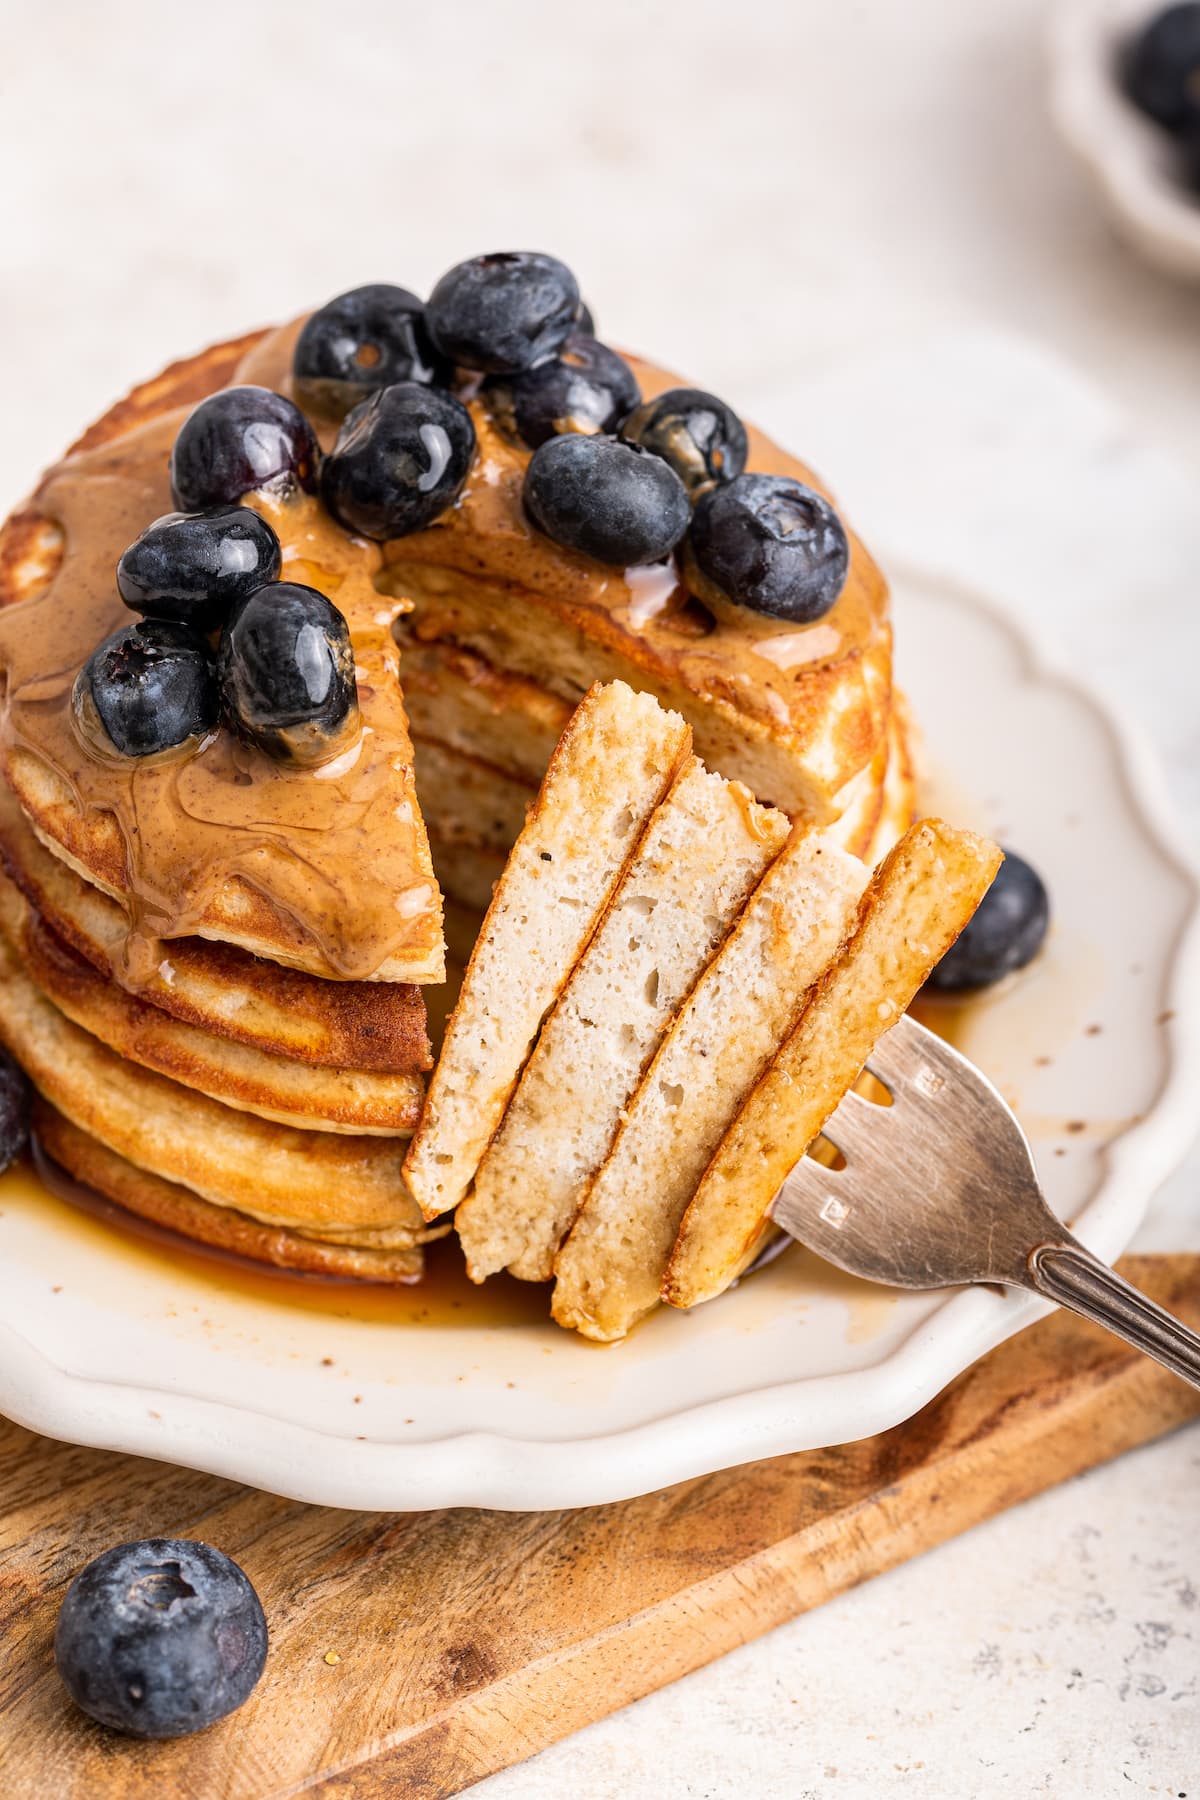 A stack of protein pancakes on a plate topped with fresh blueberries, nut butter, and maple syrup. A fork is taking a large bite-size portion from the stack of pancakes.